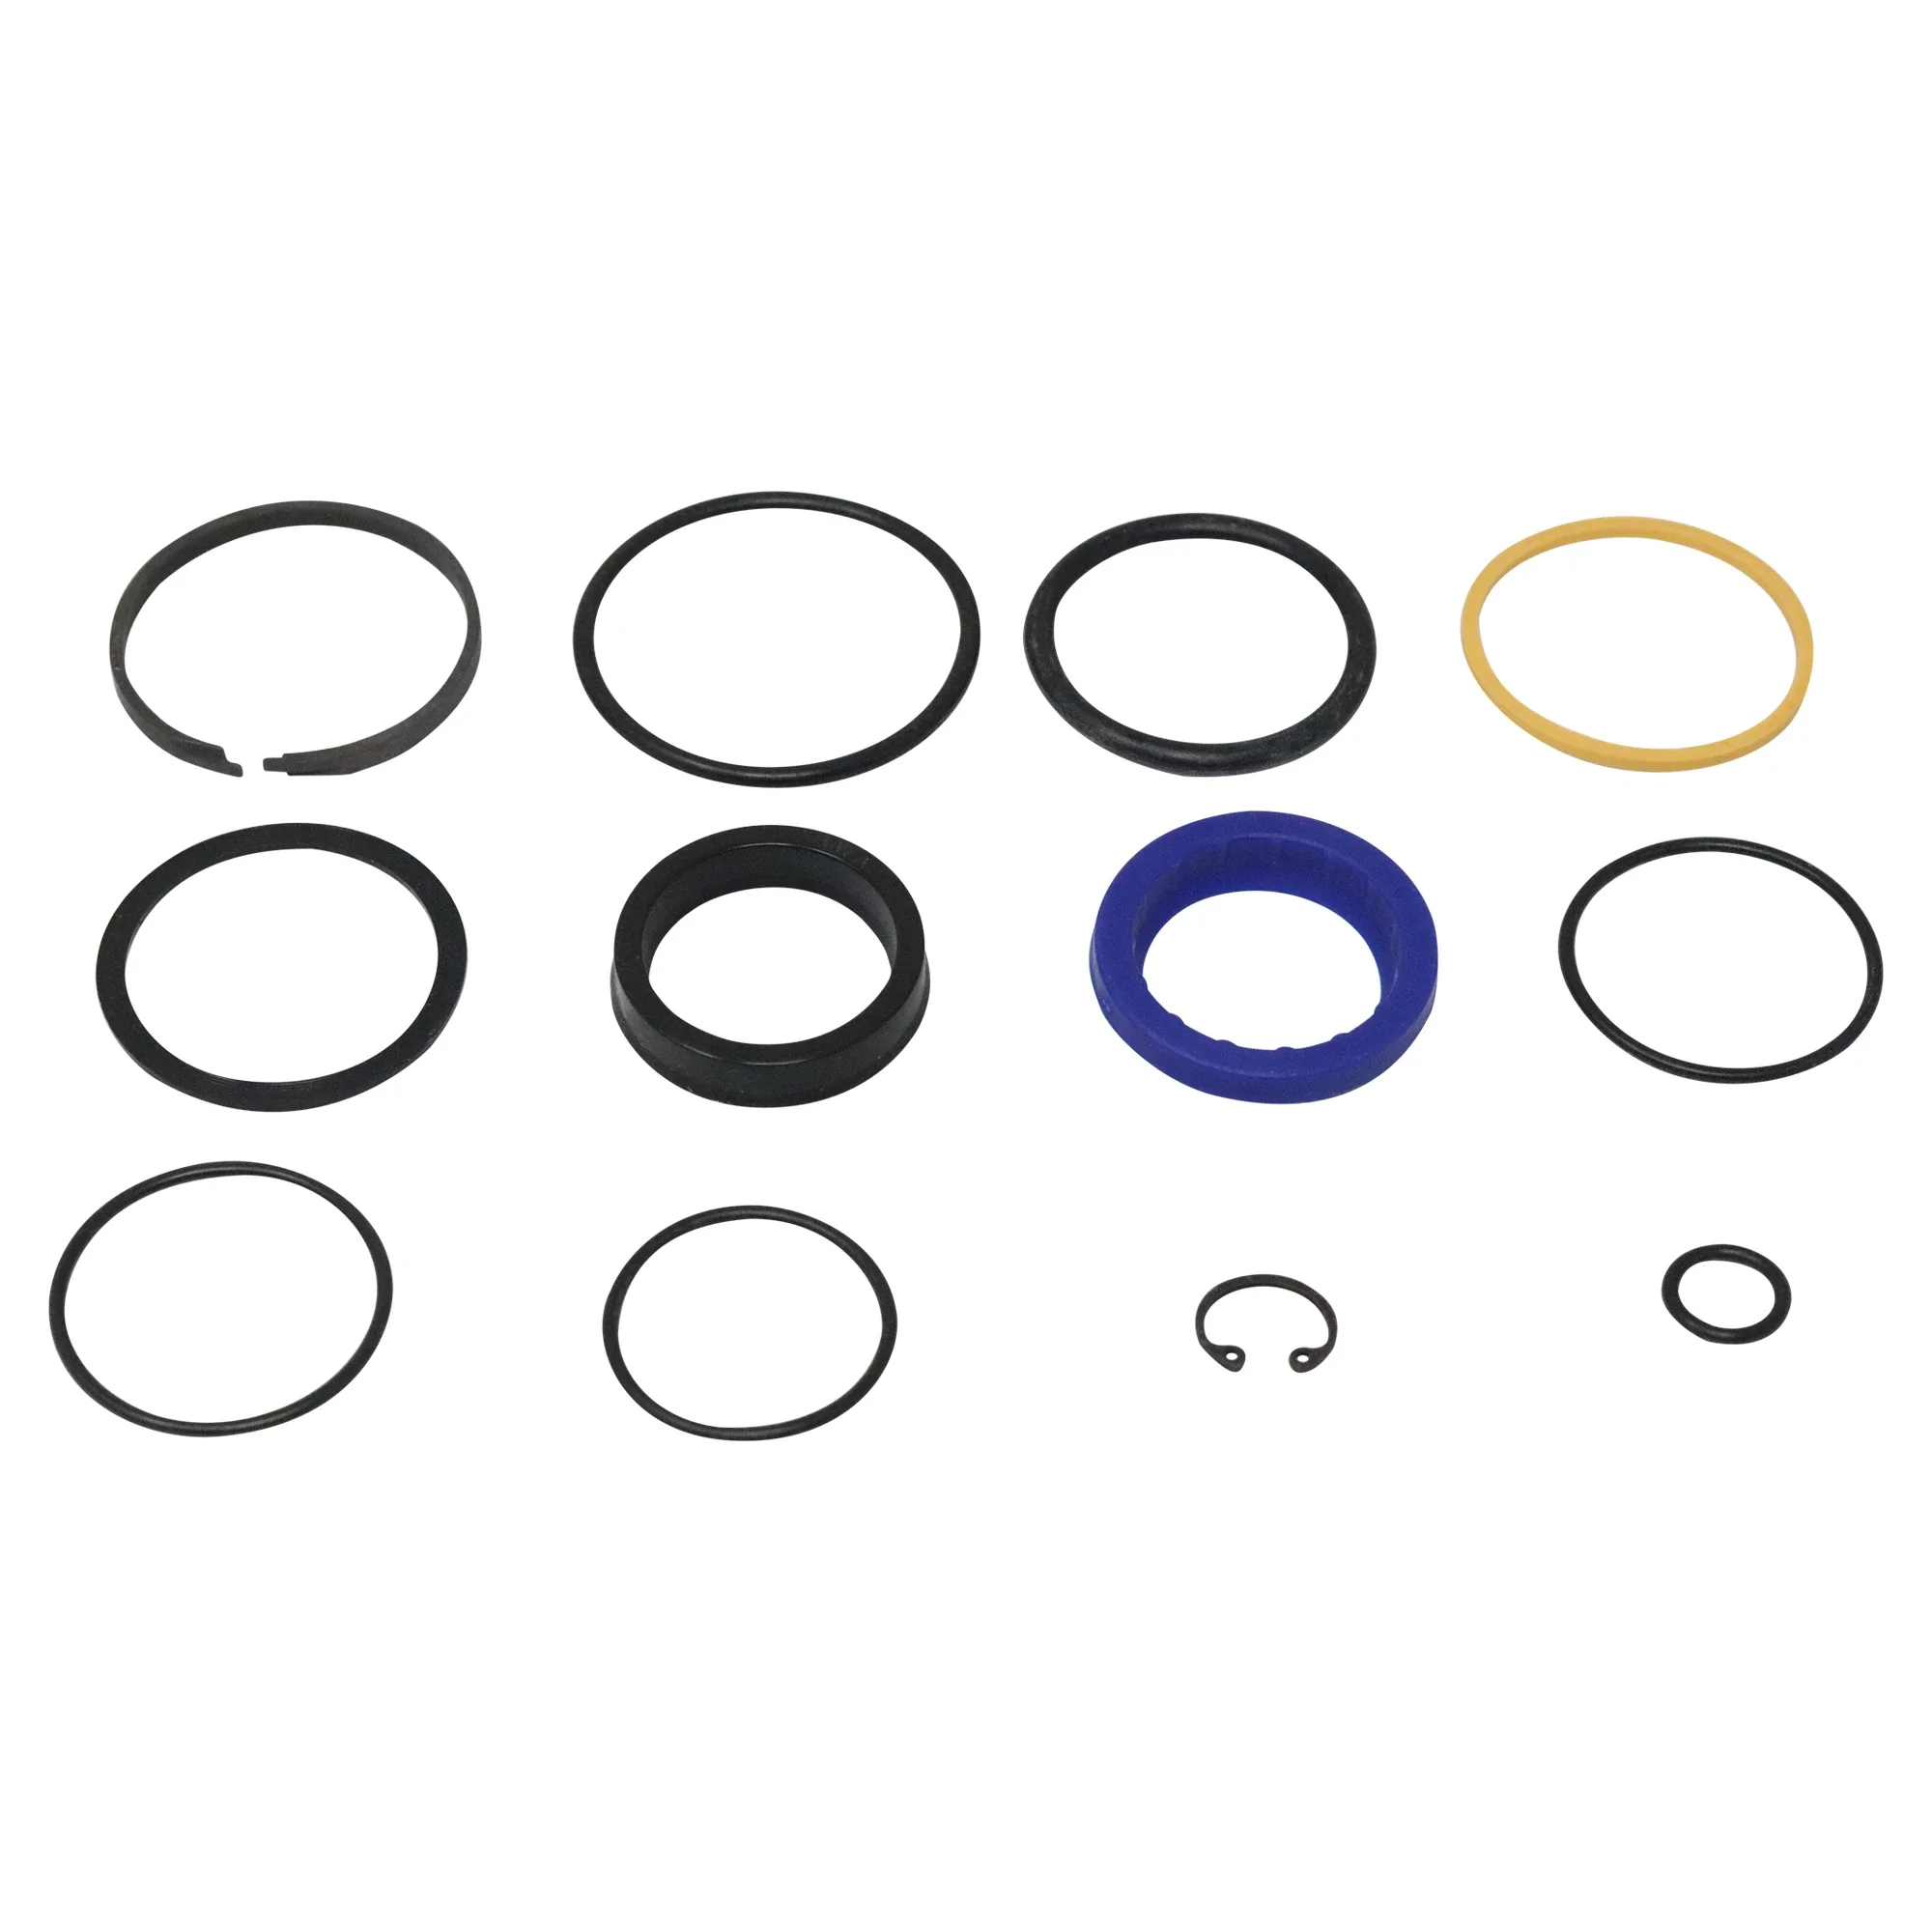 Wastebuilt® Replacement for Curotto-Can Slide Cylinder Seal Kit - Prince